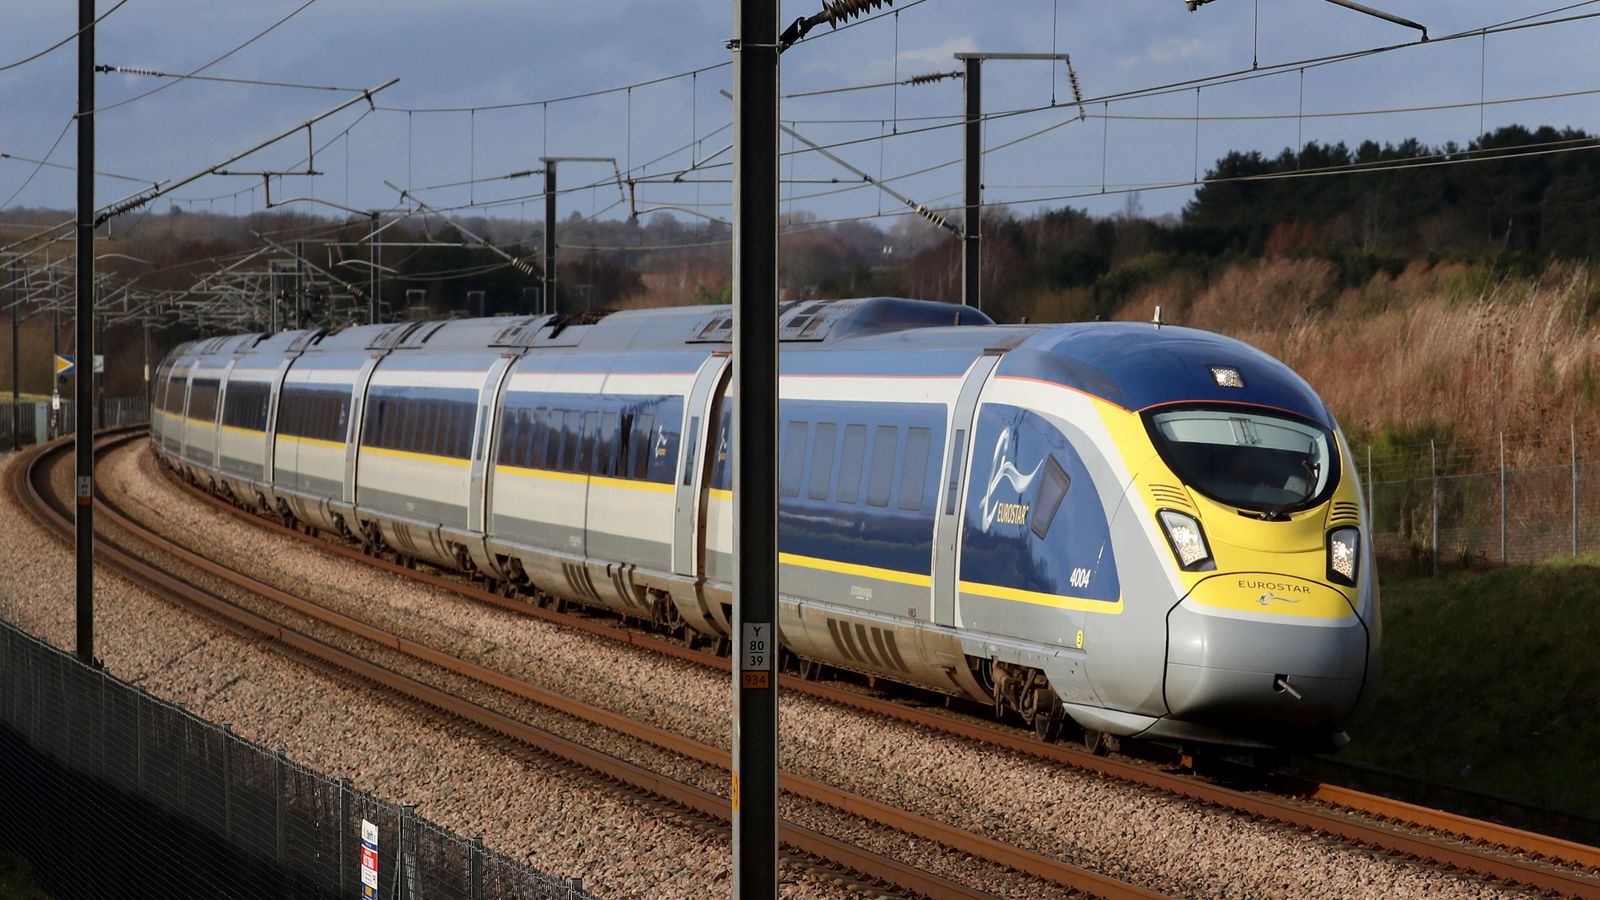 Amsterdam-bound Eurostar train leaves 700 passengers stranded with no power or toilets after breaking down in Kent | UK News